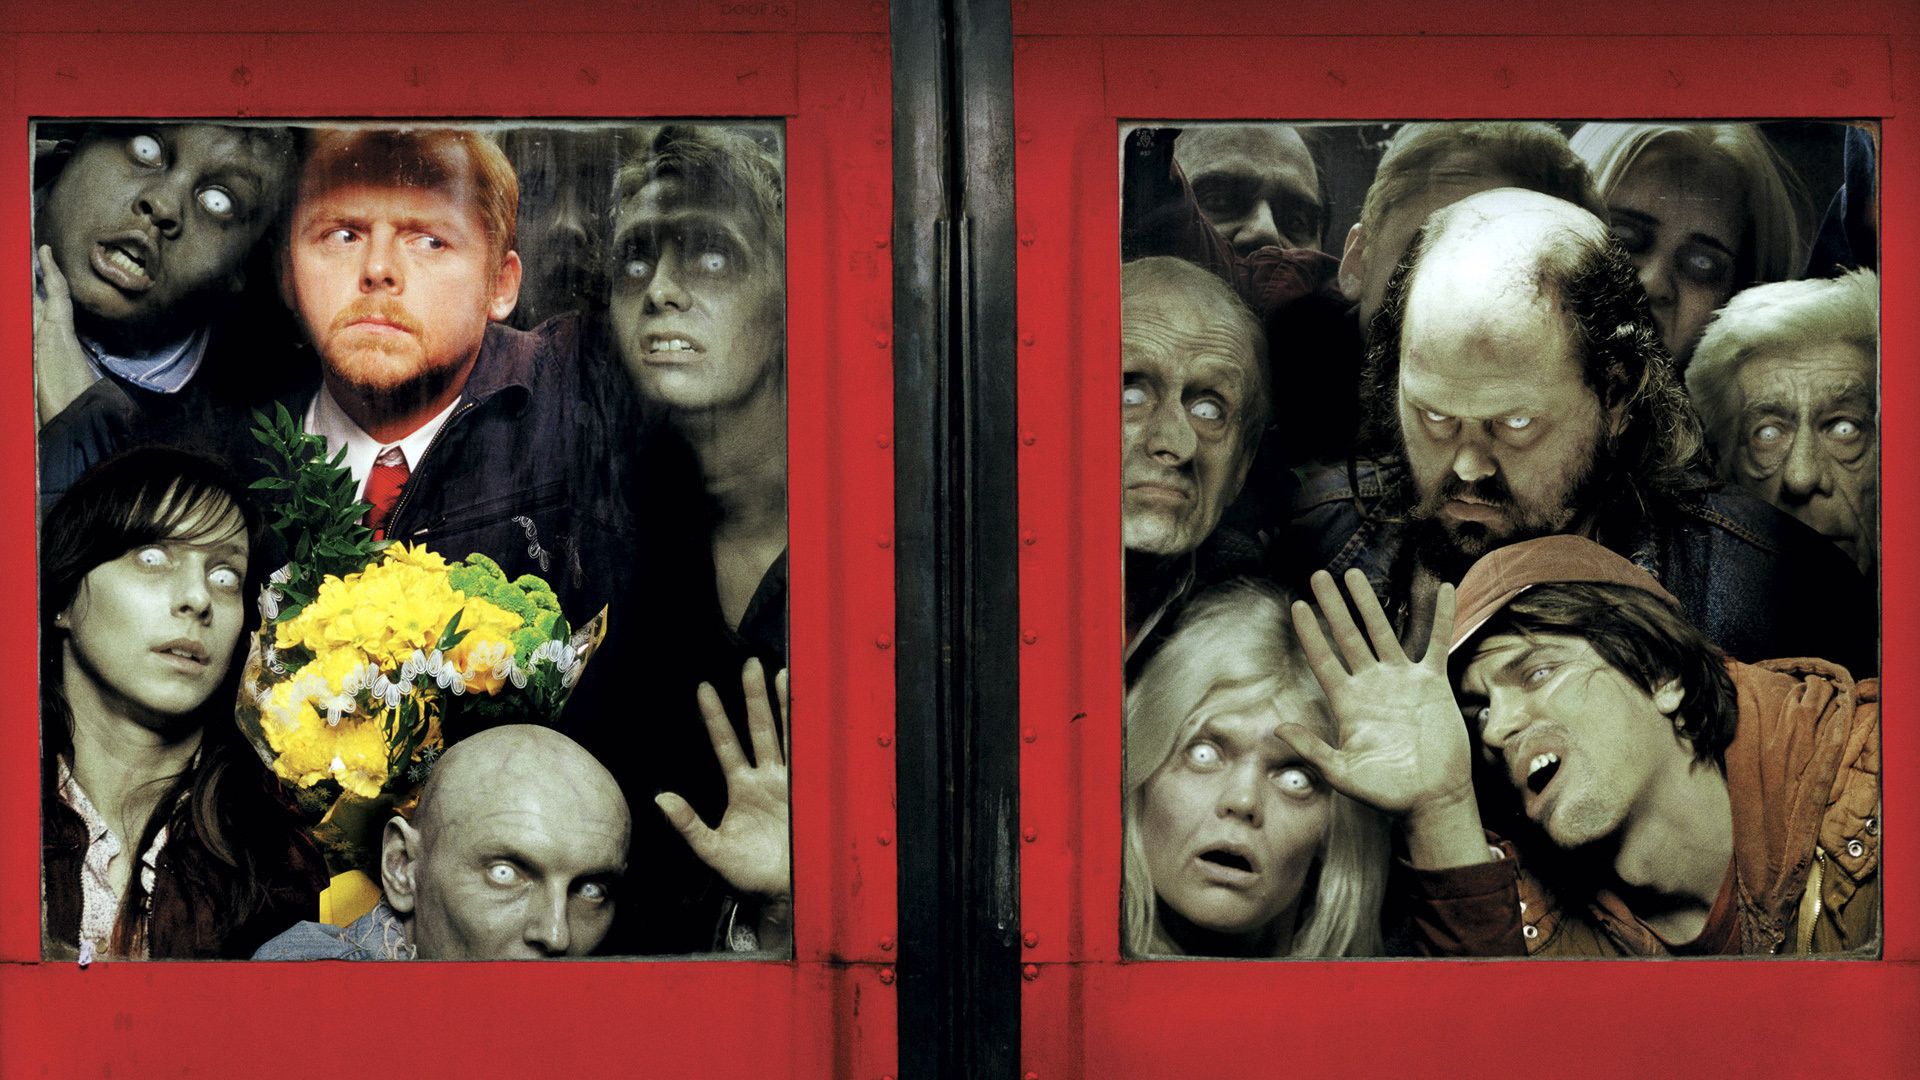 Shaun of the Dead background